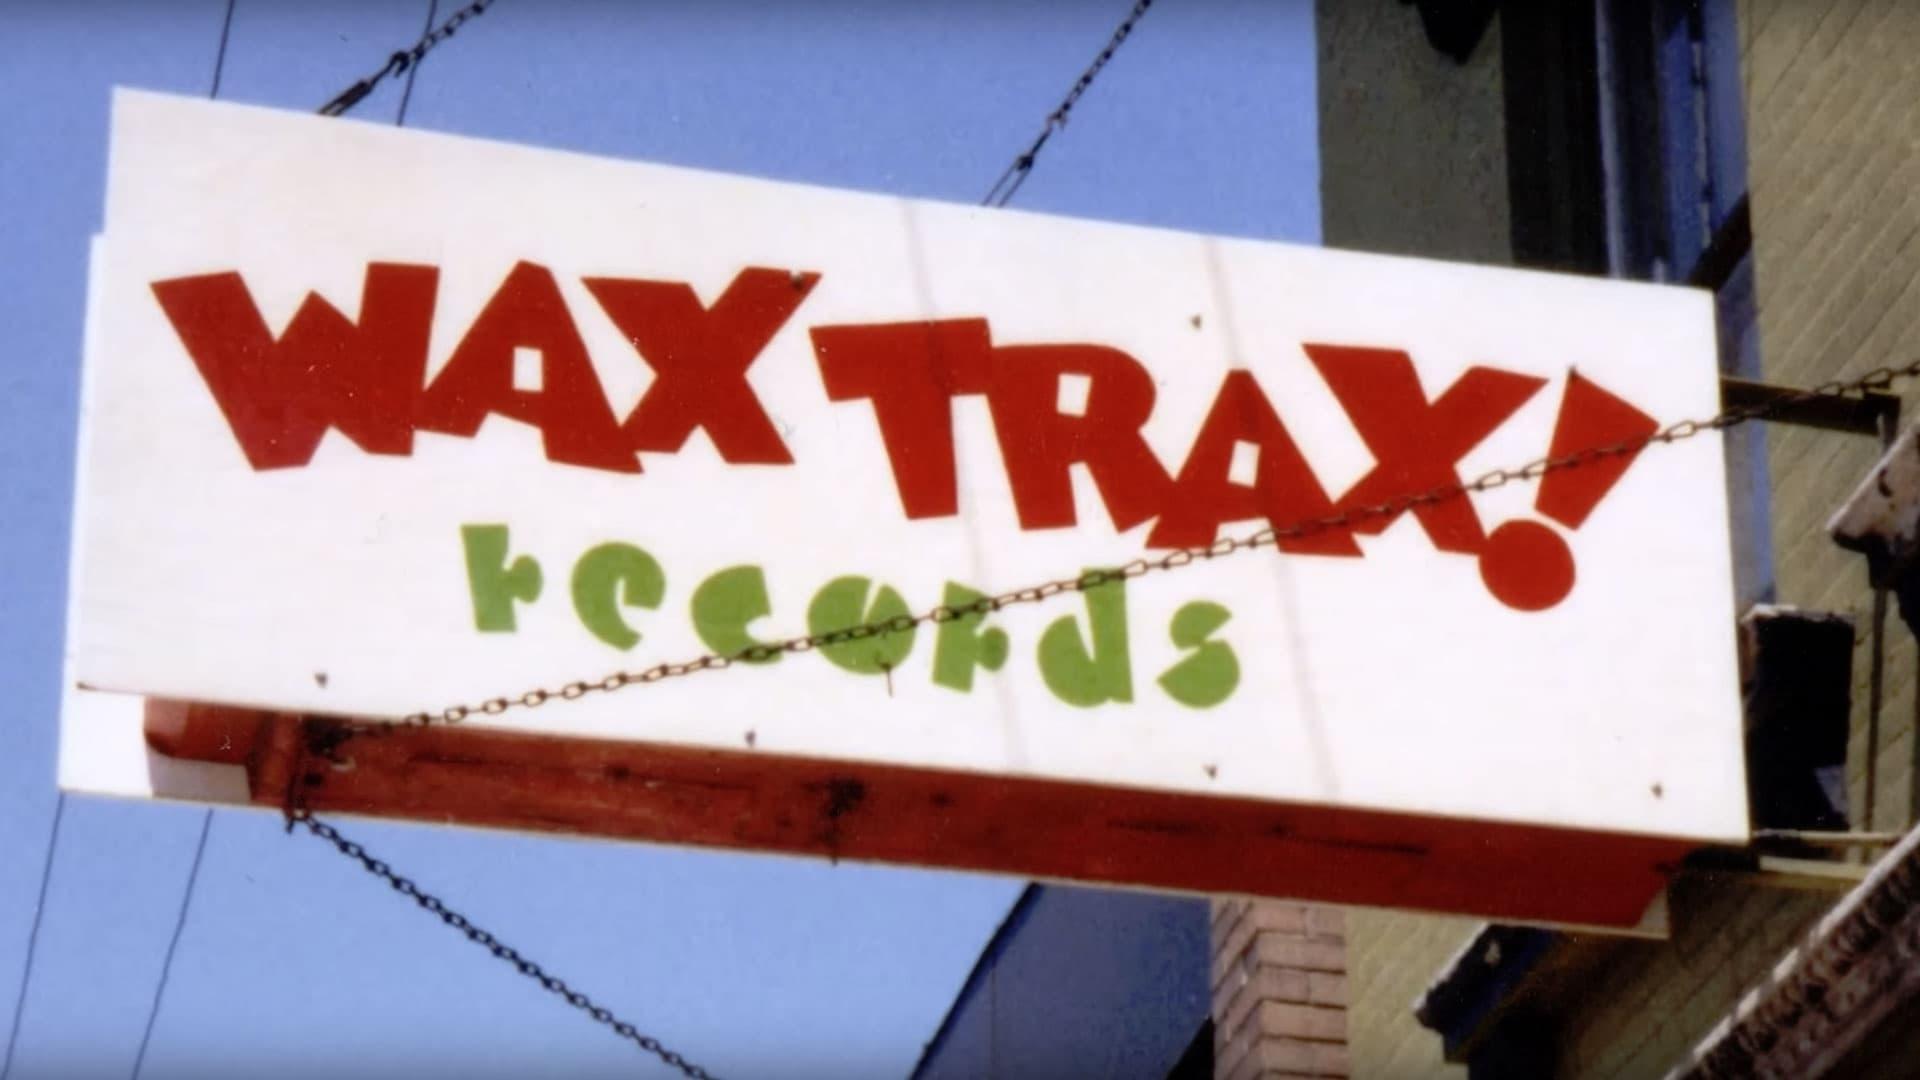 Industrial Accident: The Story of Wax Trax! Records backdrop